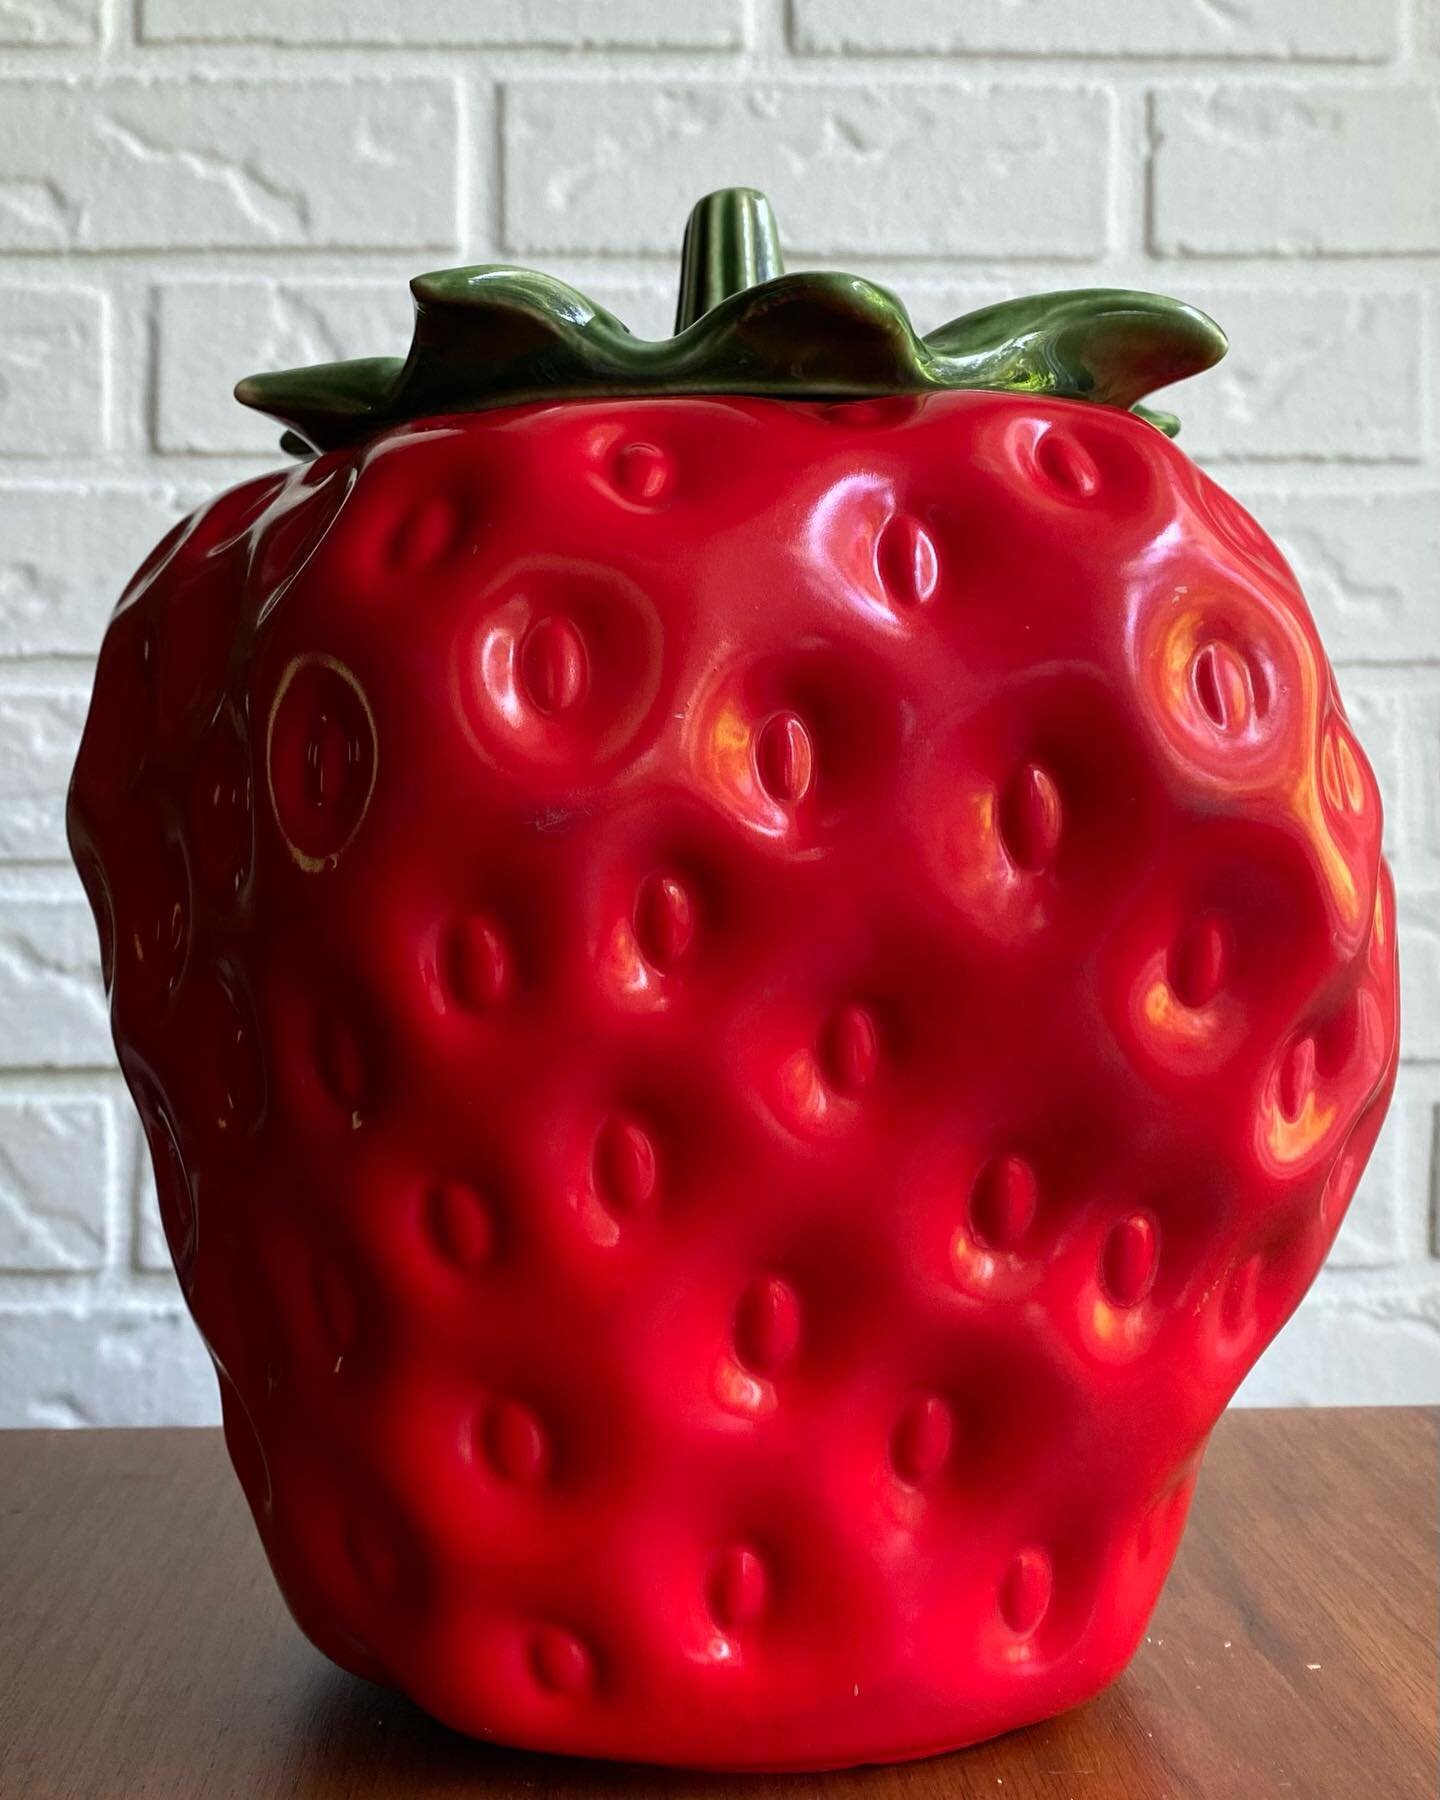 🍓 FOR SALE: 🍓
Vintage Mid Century Pop Art McCoy Calif. Pottery 263 Red Strawberry Cookie Jar - This strawberry is soooooo cool! Excellent vintage condition: Only signs of wear are where the lid goes on, from the lid rubbing on the strawberry. See p